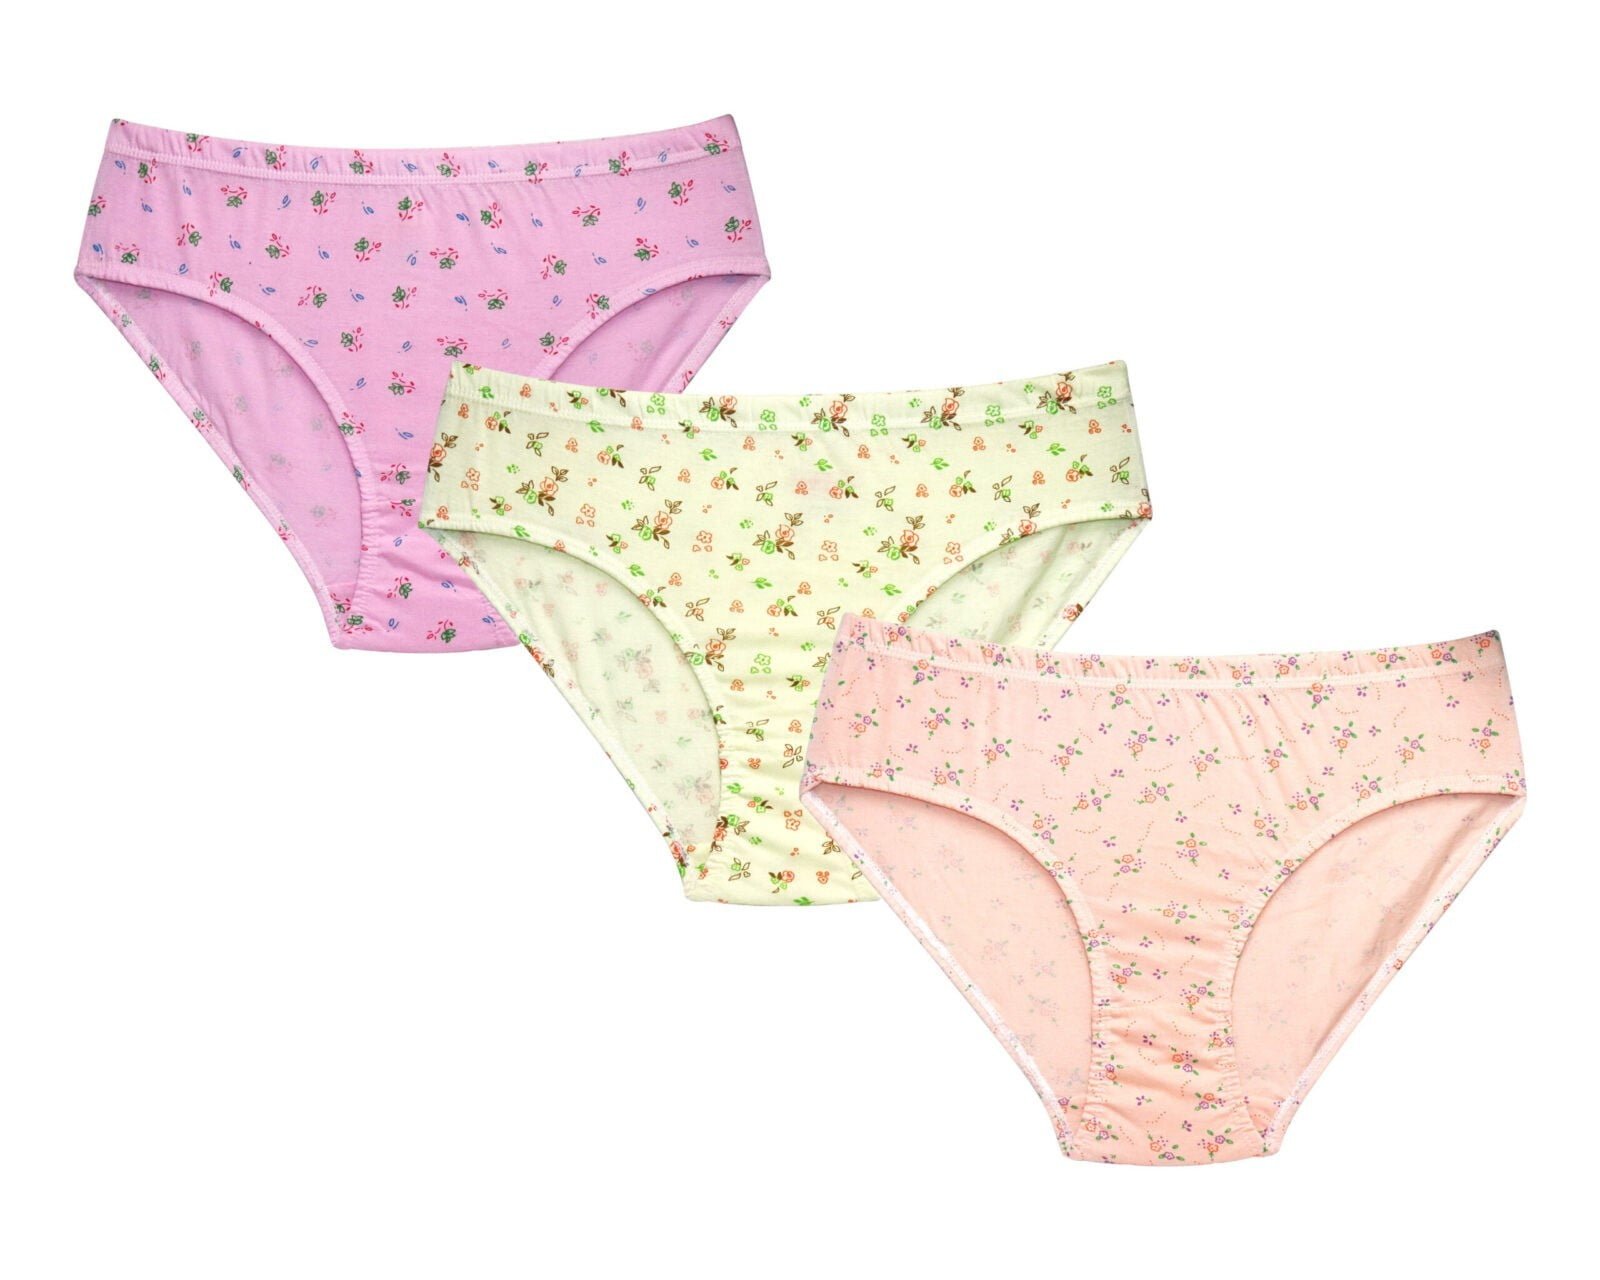 Sunny Lingerie's Ladies panties give the best comfort an